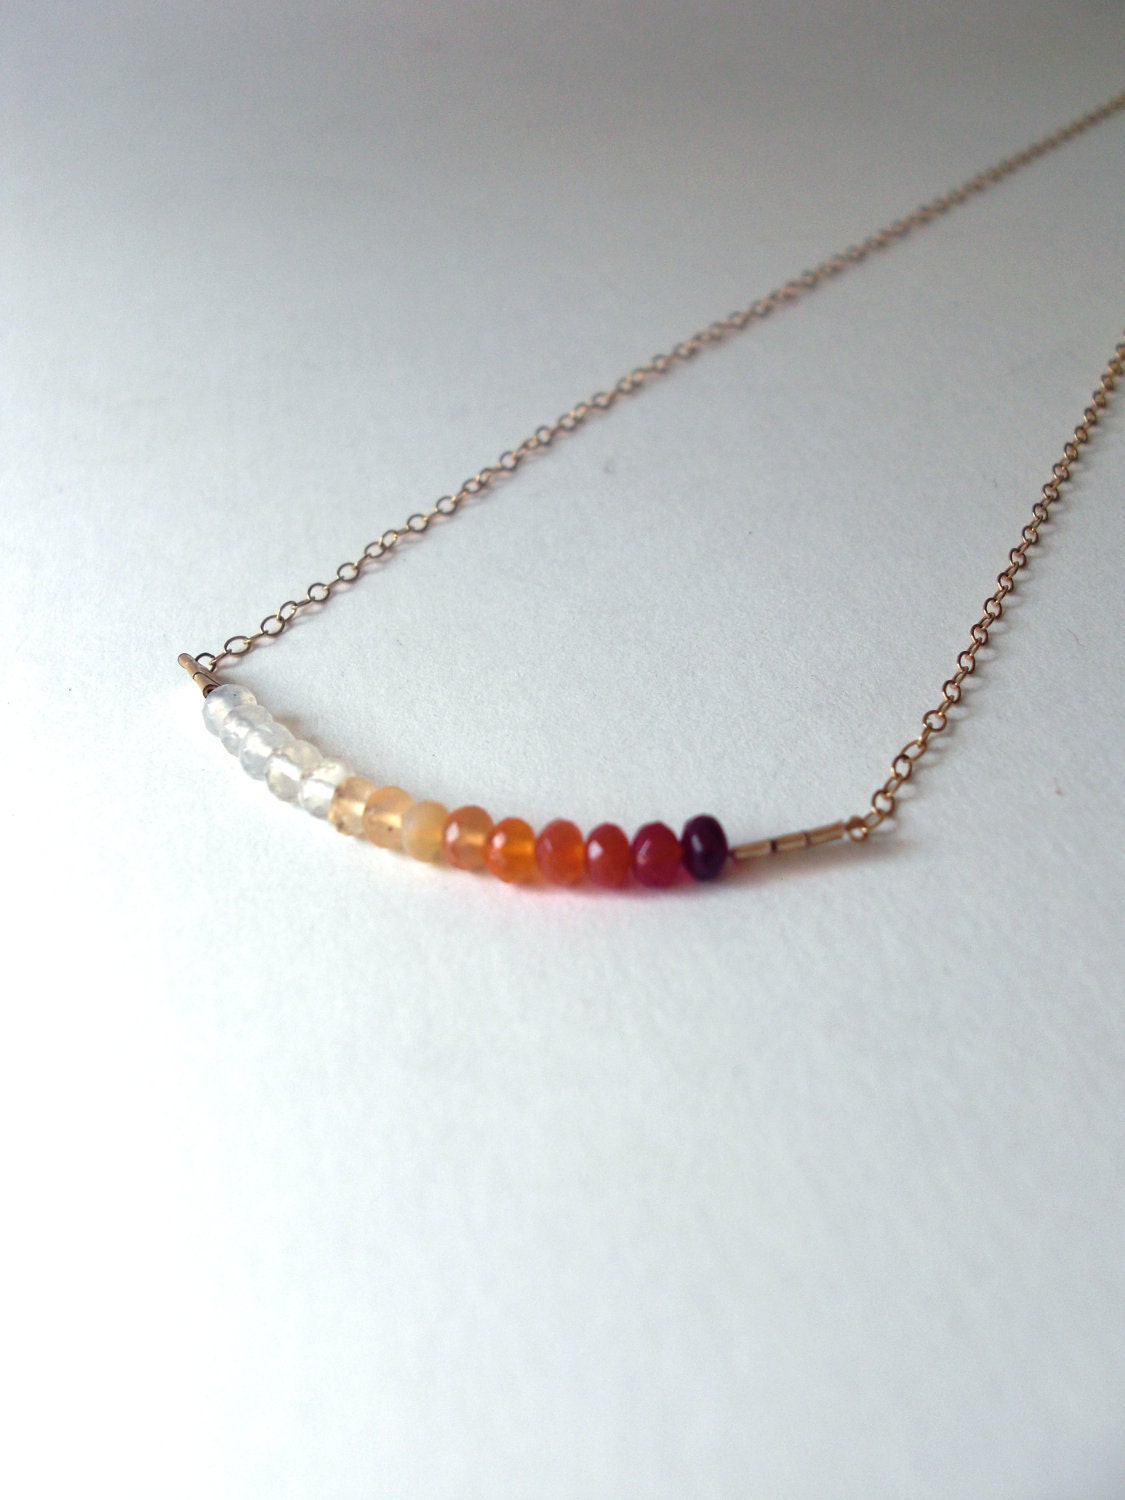 Gradational Color Fire Opal Bead Necklace in Red, Orange, Yellow, White and Clear - PalomaDeOro